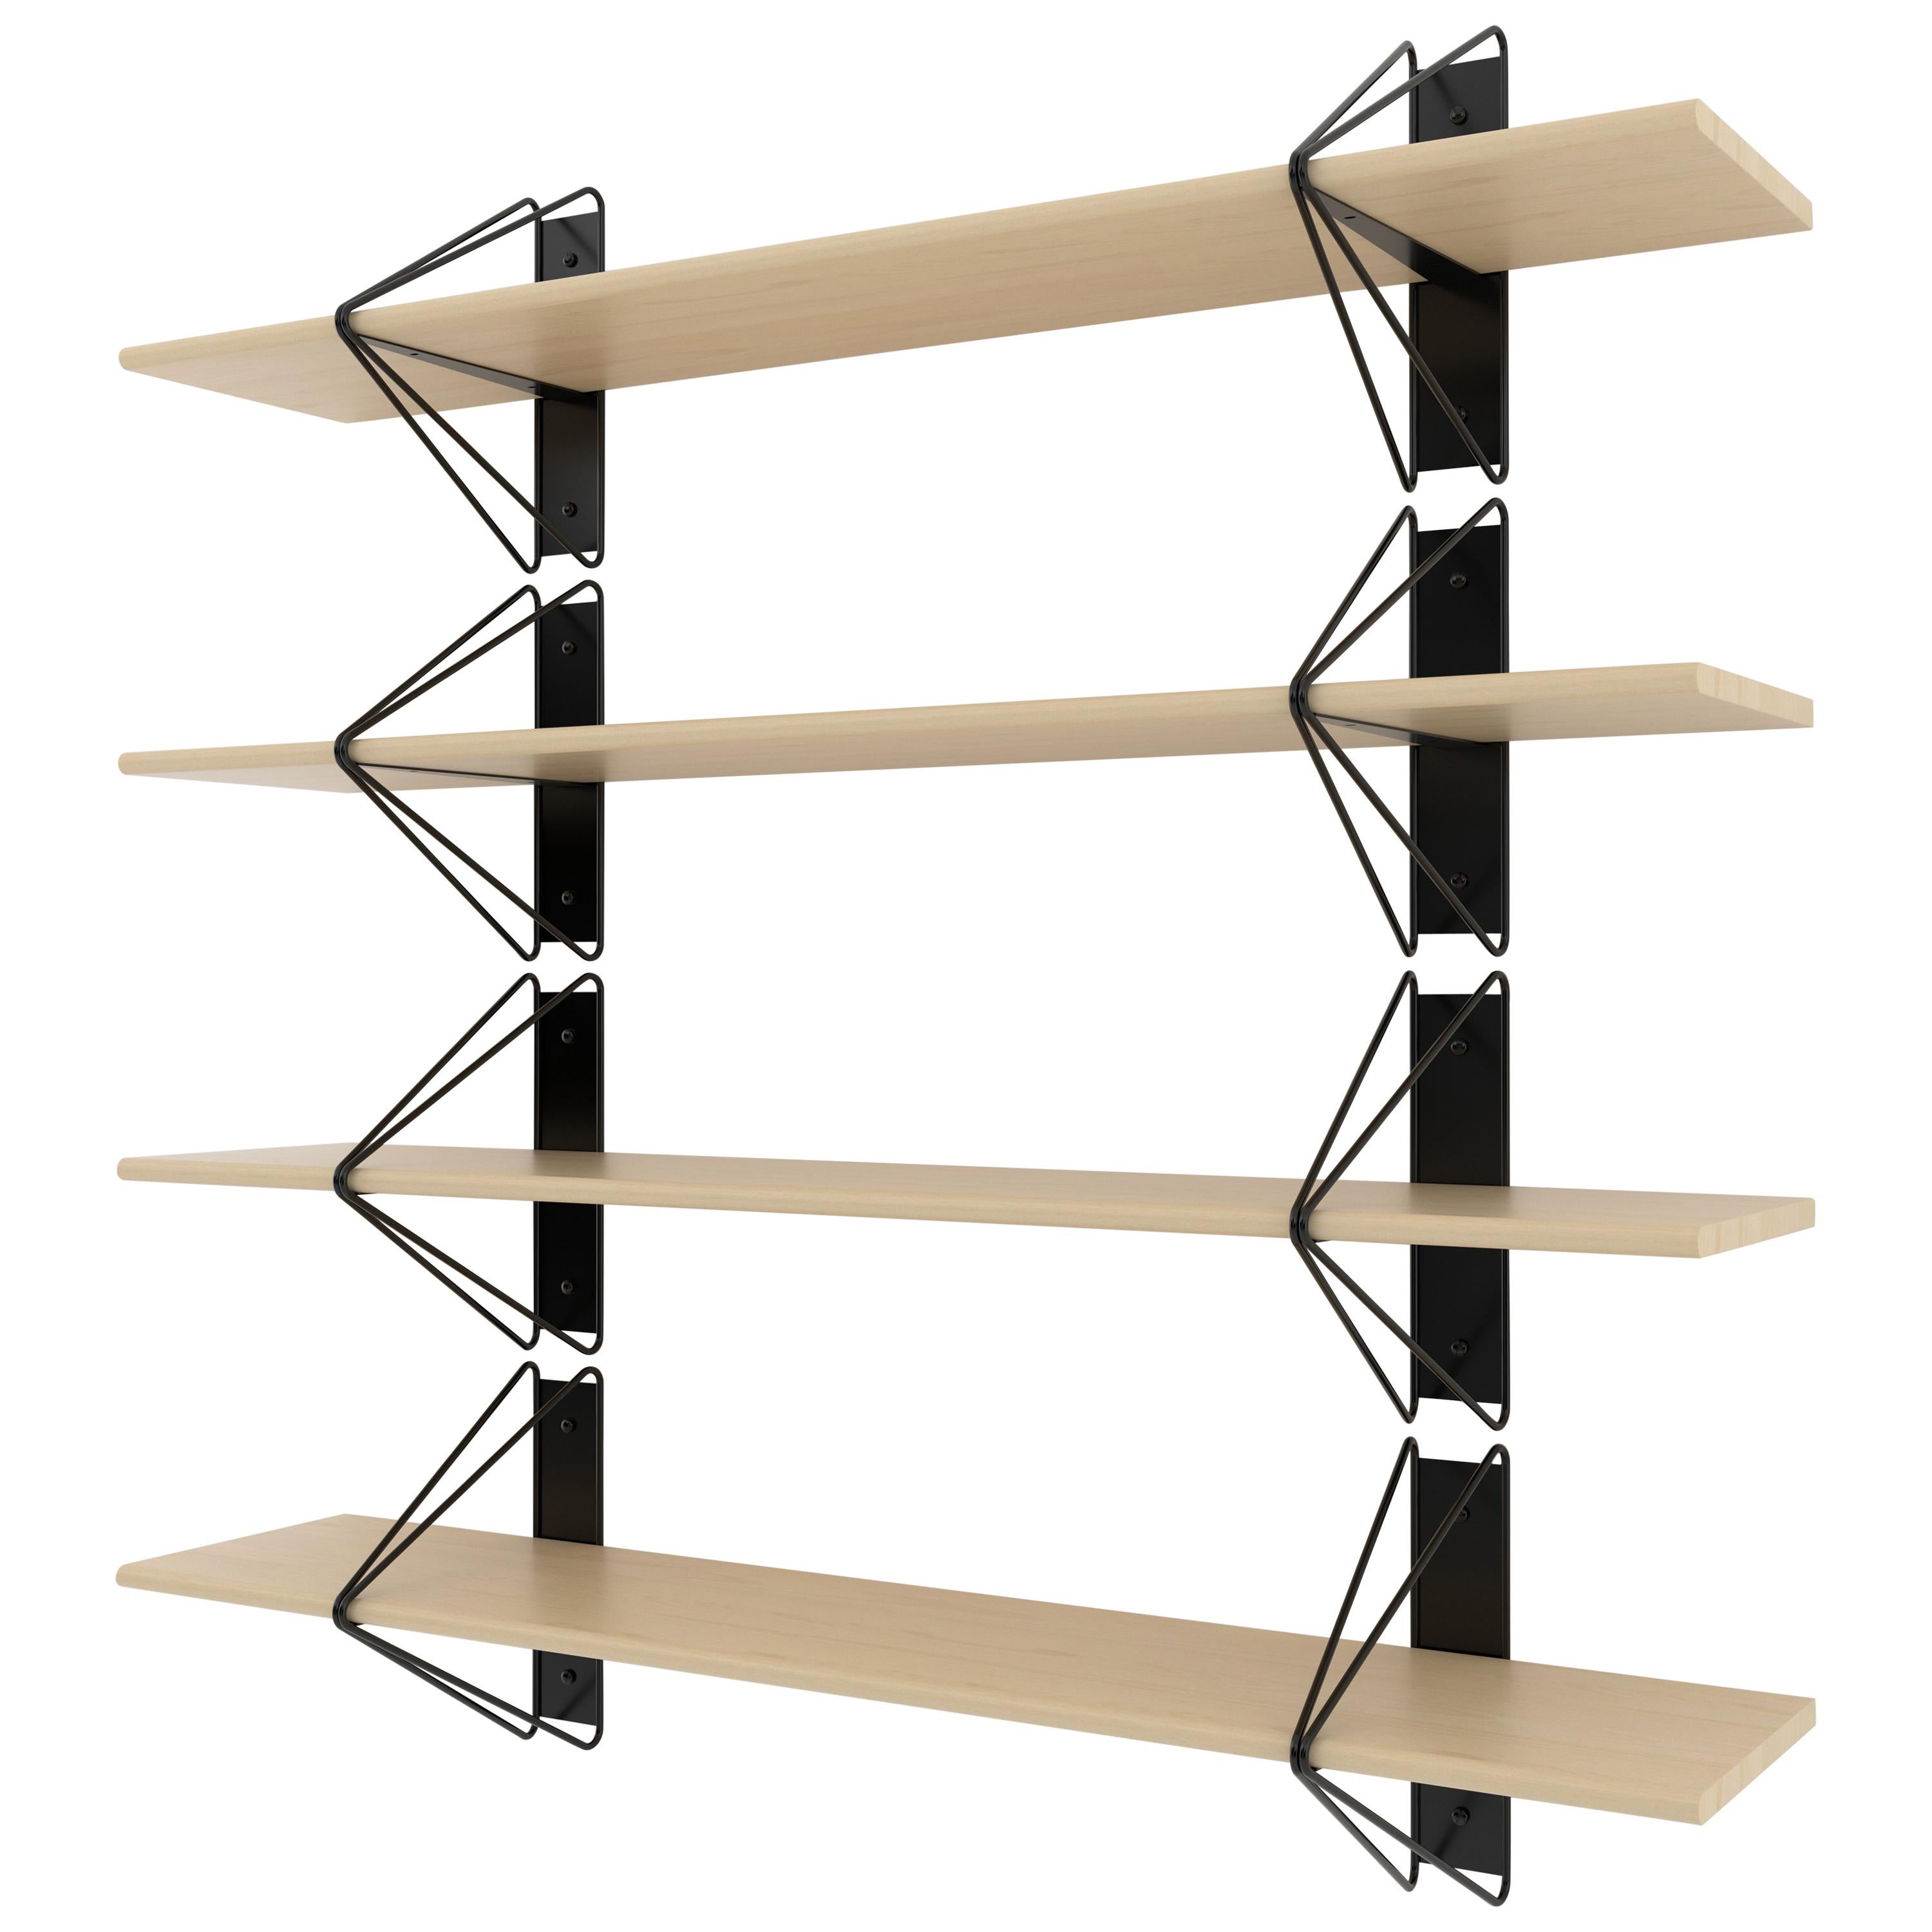 American Set of 3 Strut Shelves from Souda, 84in, Black and Maple, Made to Order For Sale